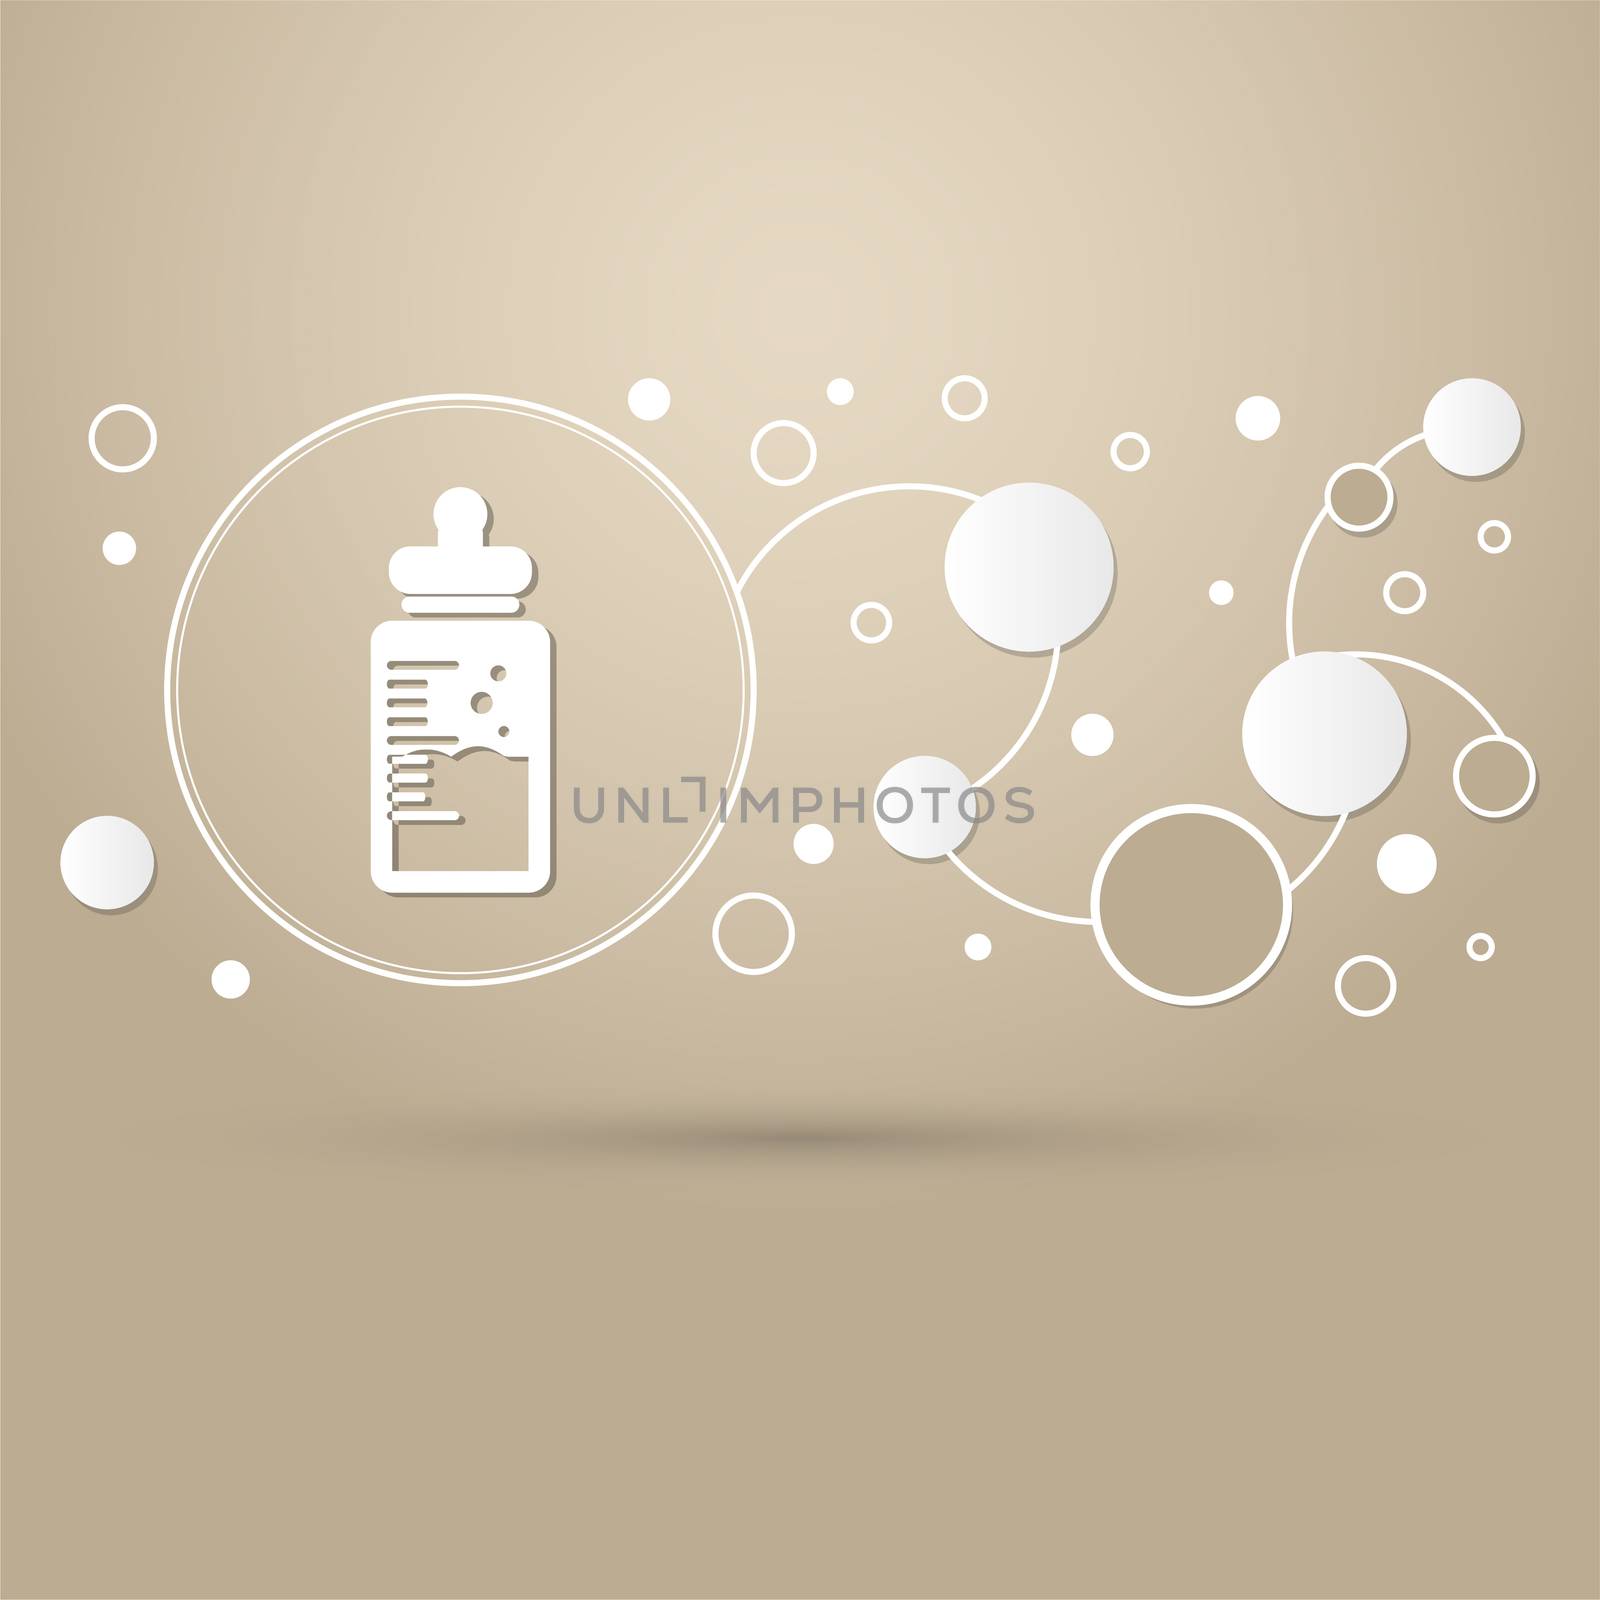 Baby milk bottle icon on a brown background with elegant style and modern design infographic.  by Adamchuk